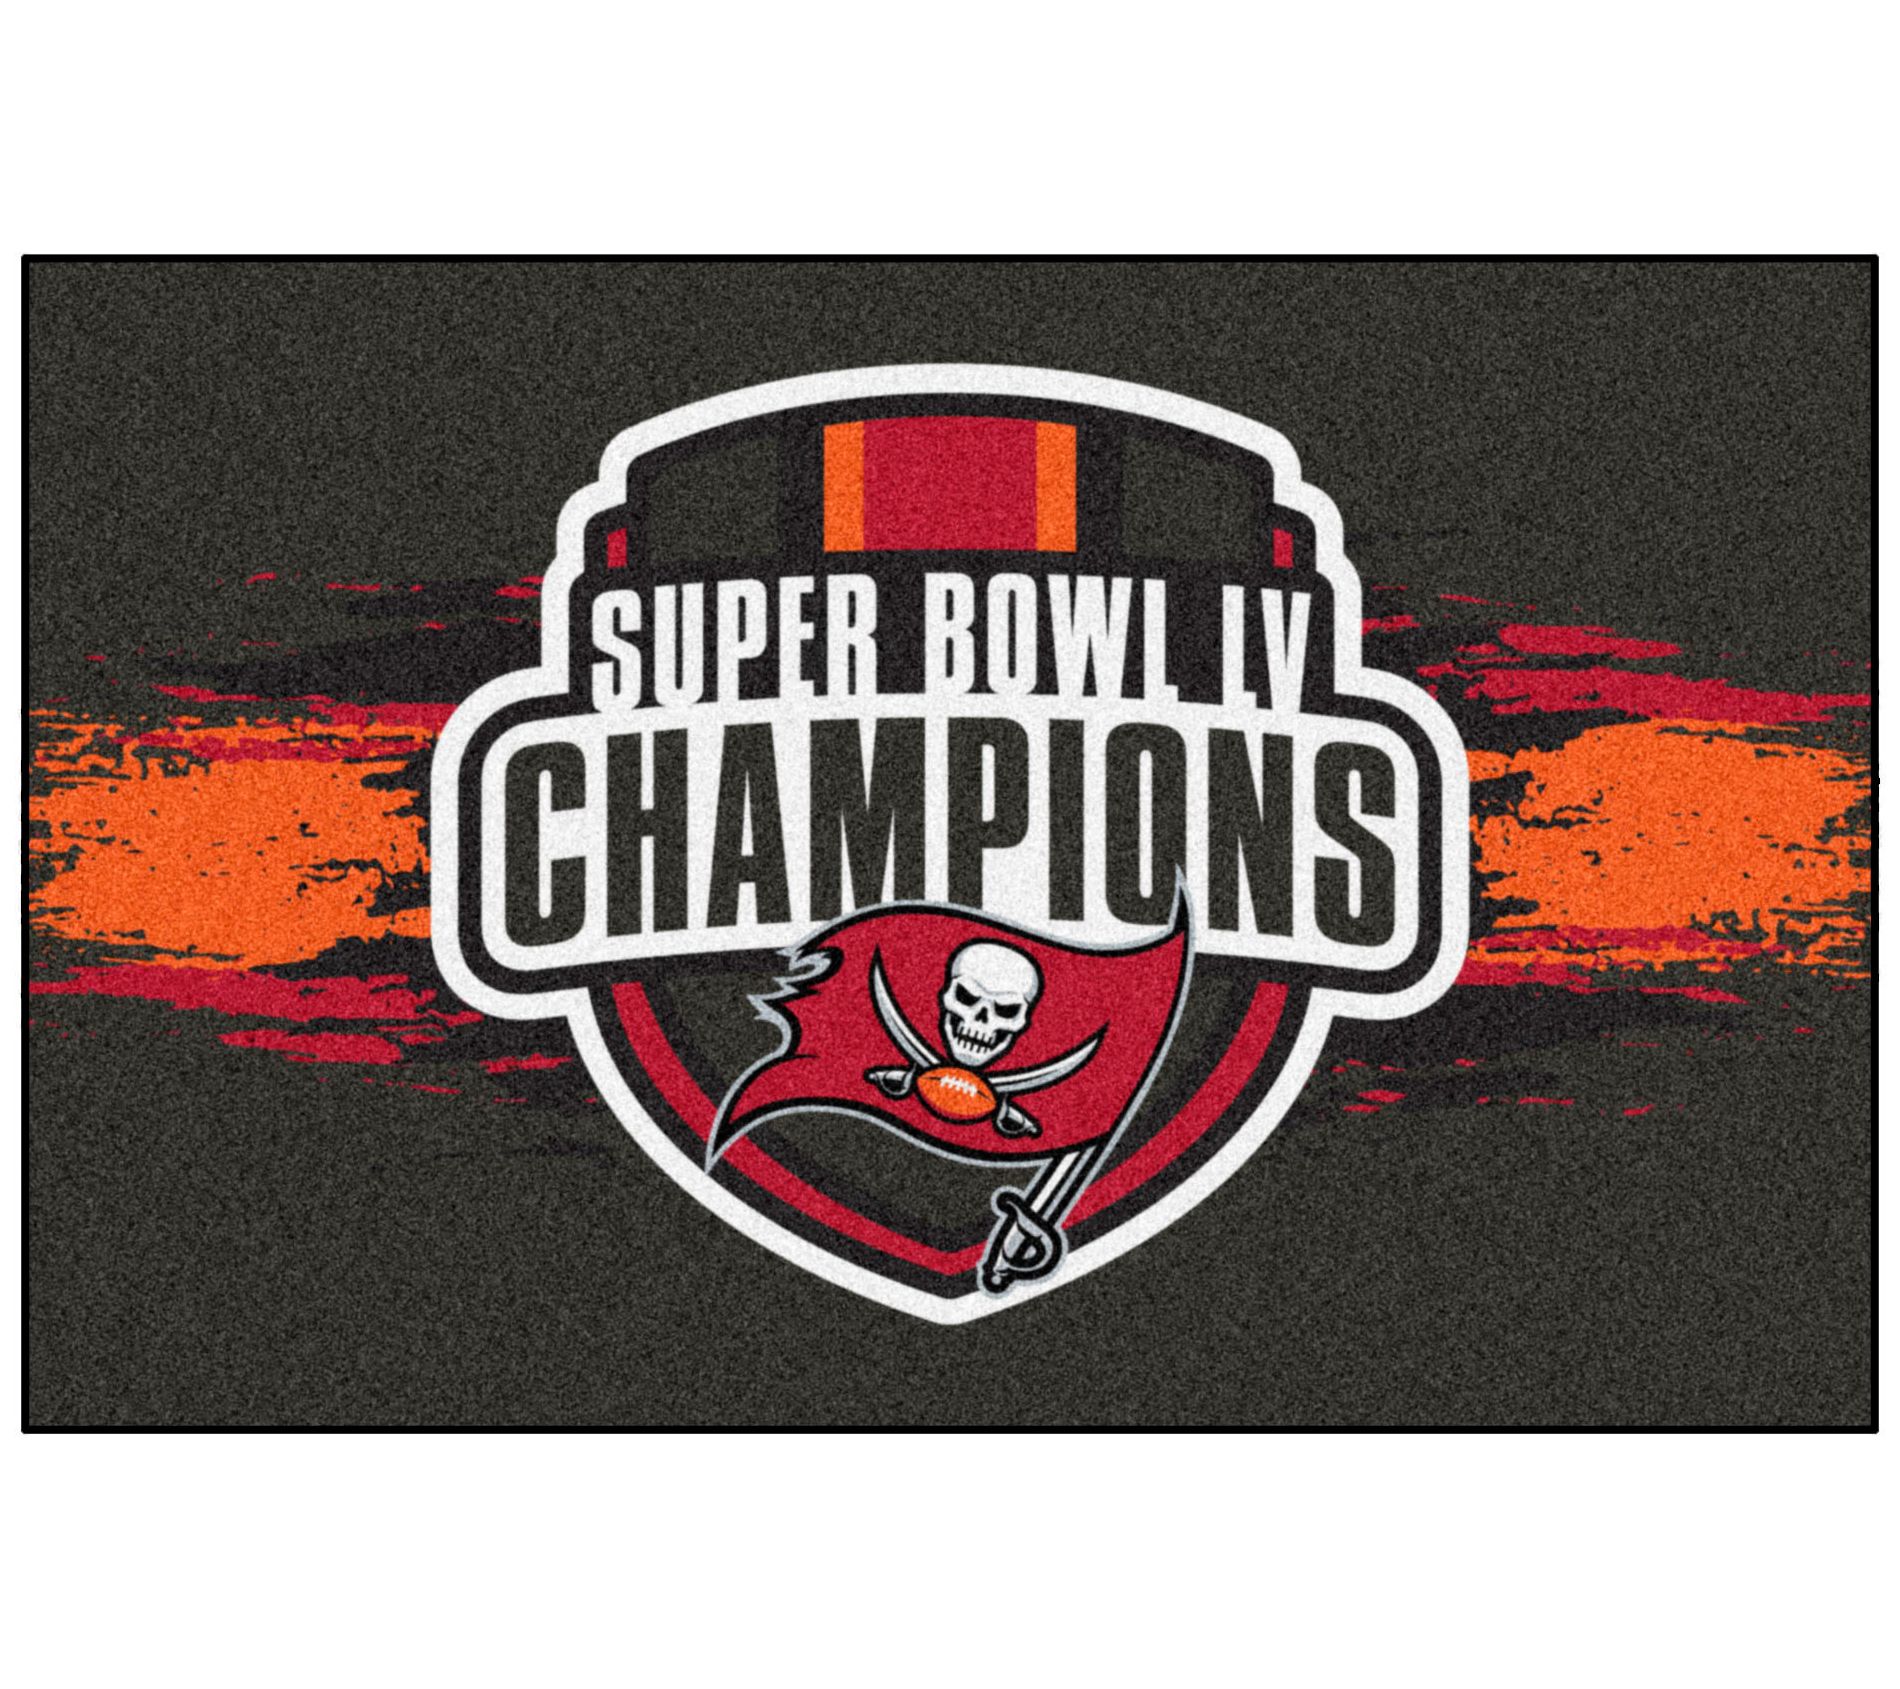 Tampa Bay Buccaneers, Super Bowl champions, are coming to the